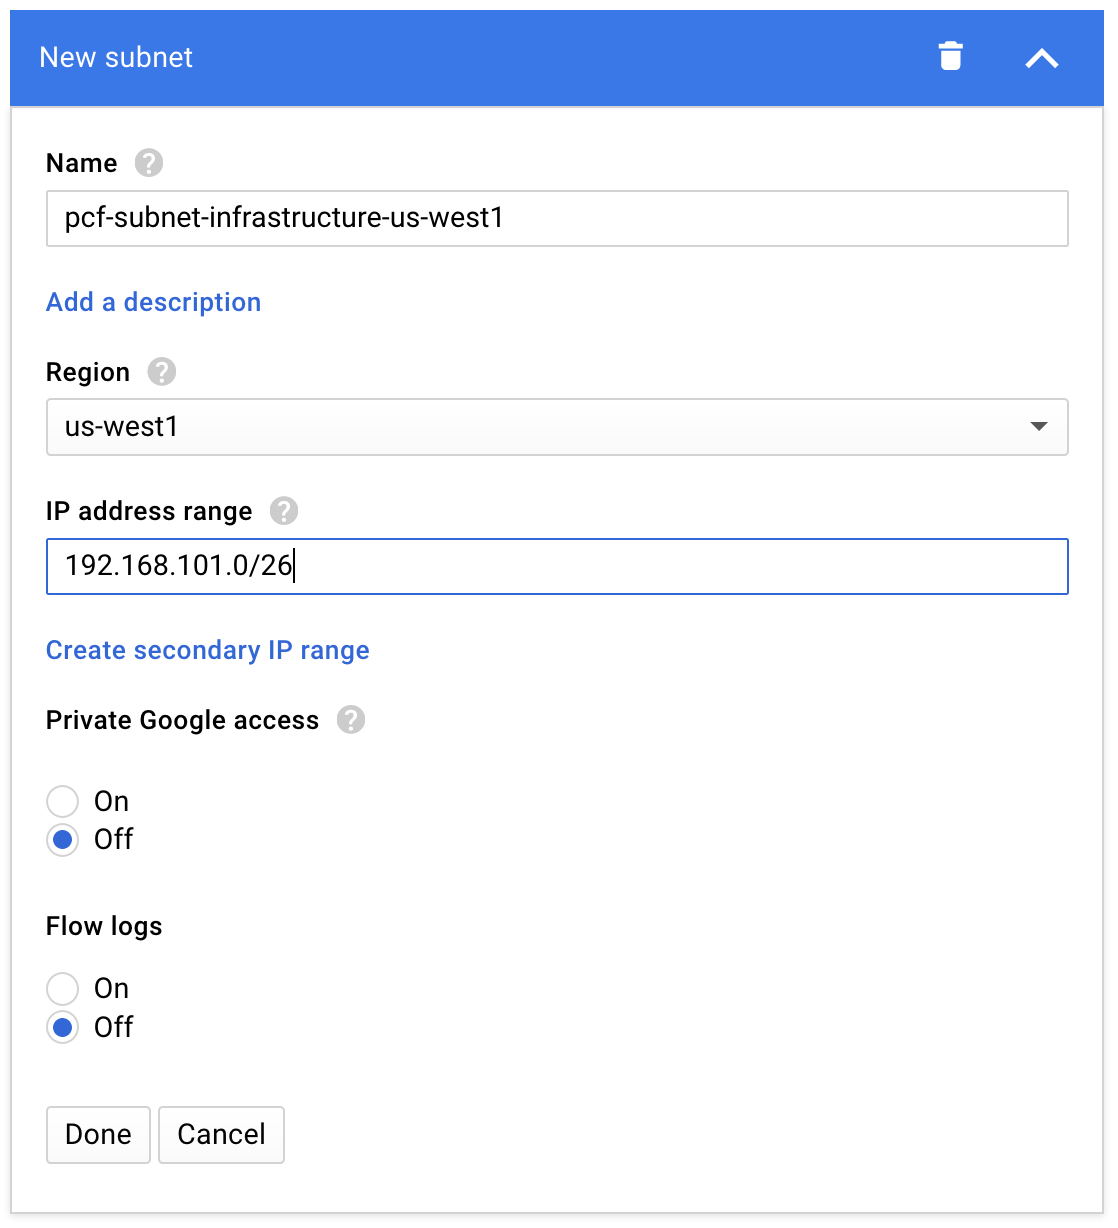 The New subnet dialog box includes these sections: Name, Region, IP address range, Private Google access, and Flow logs.